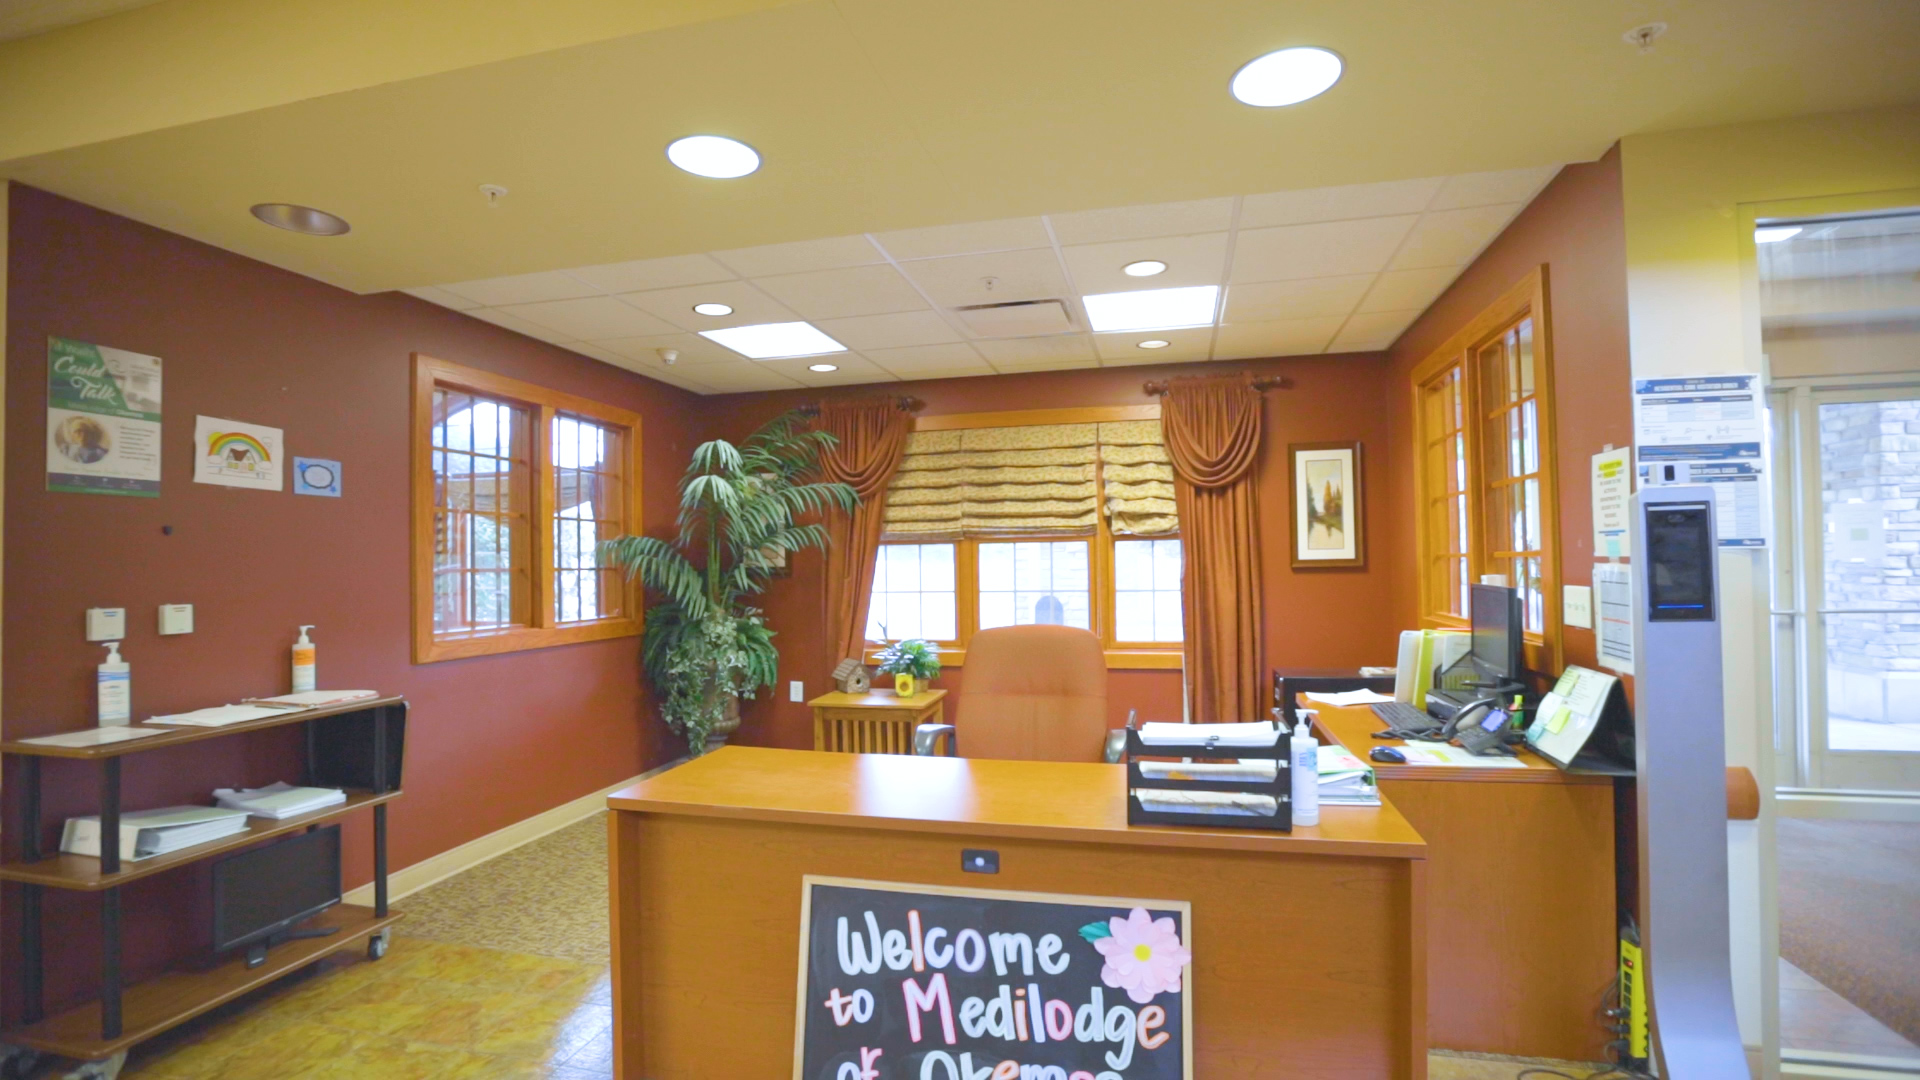 Front desk with Welcome sign. Three windows on the background.